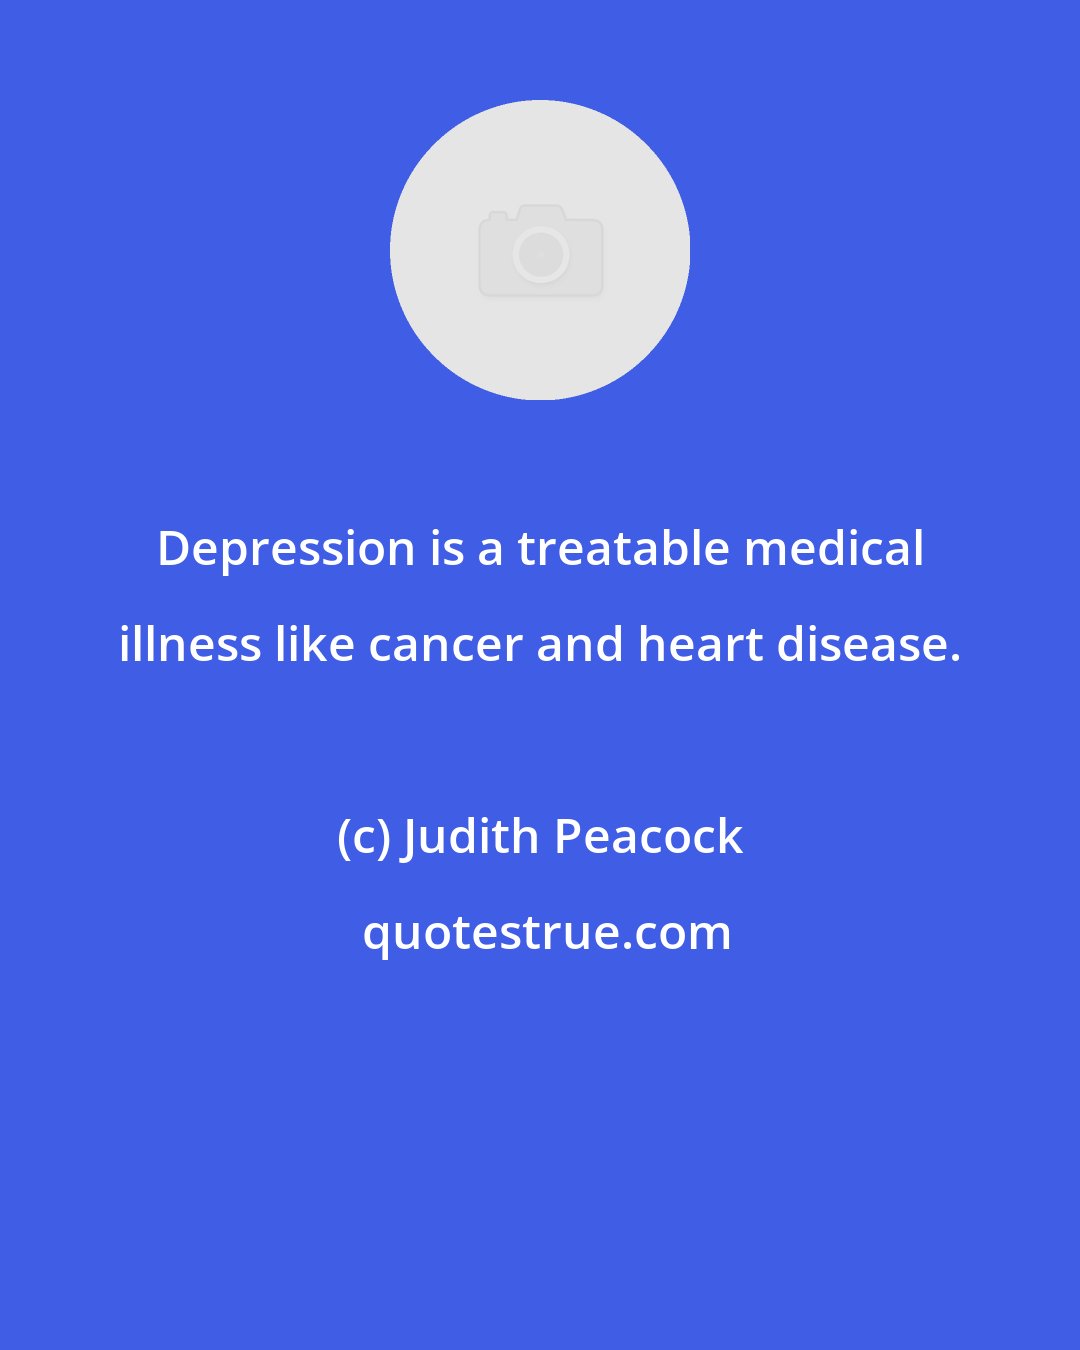 Judith Peacock: Depression is a treatable medical illness like cancer and heart disease.